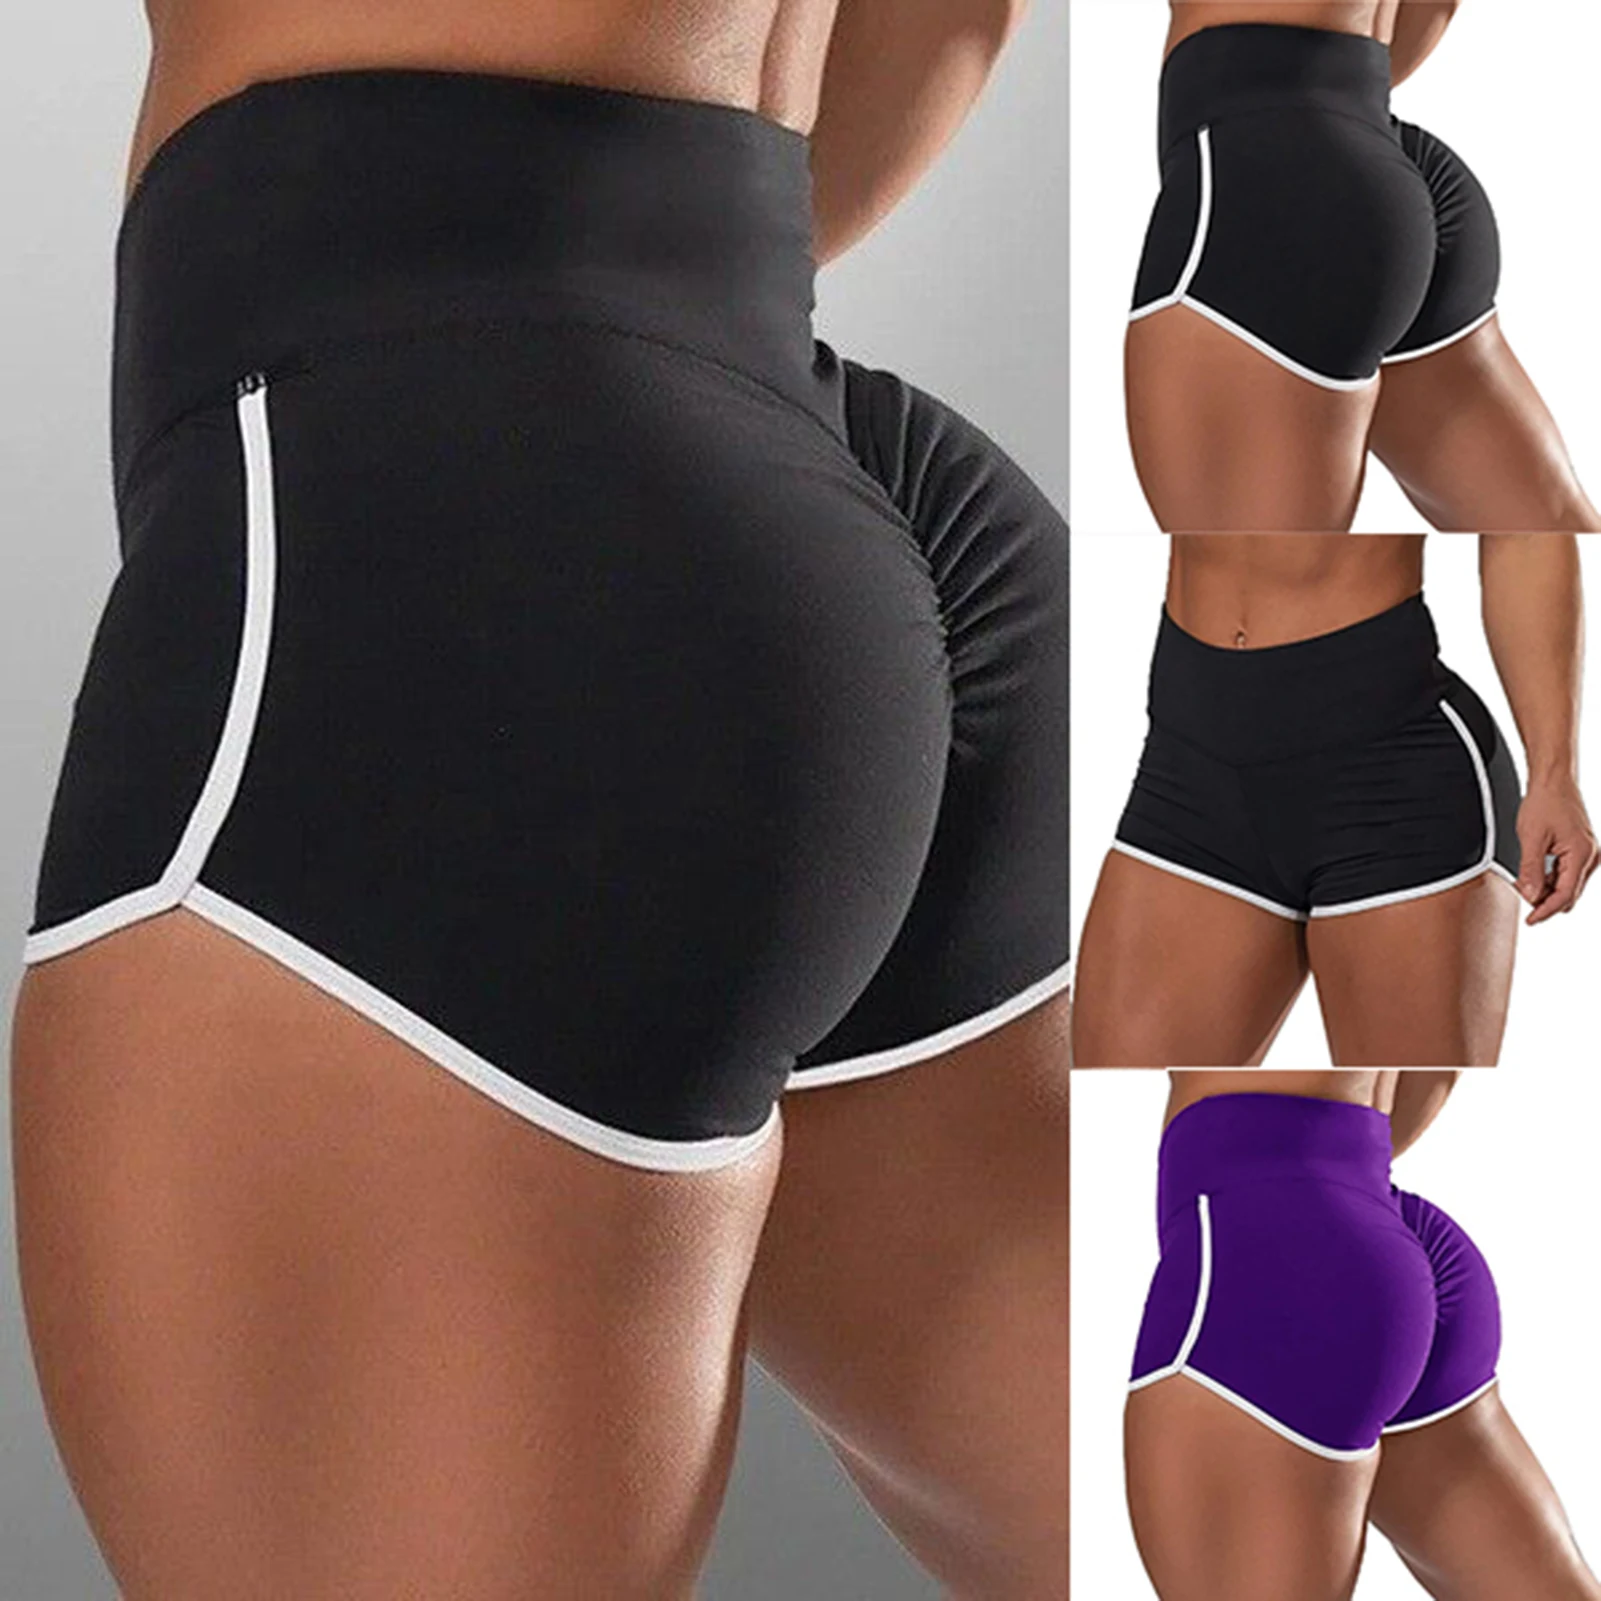 Women Sports Athletic Shorts Soft & Breathable Athletic Pants for Outdoor Excising Gym Fitness